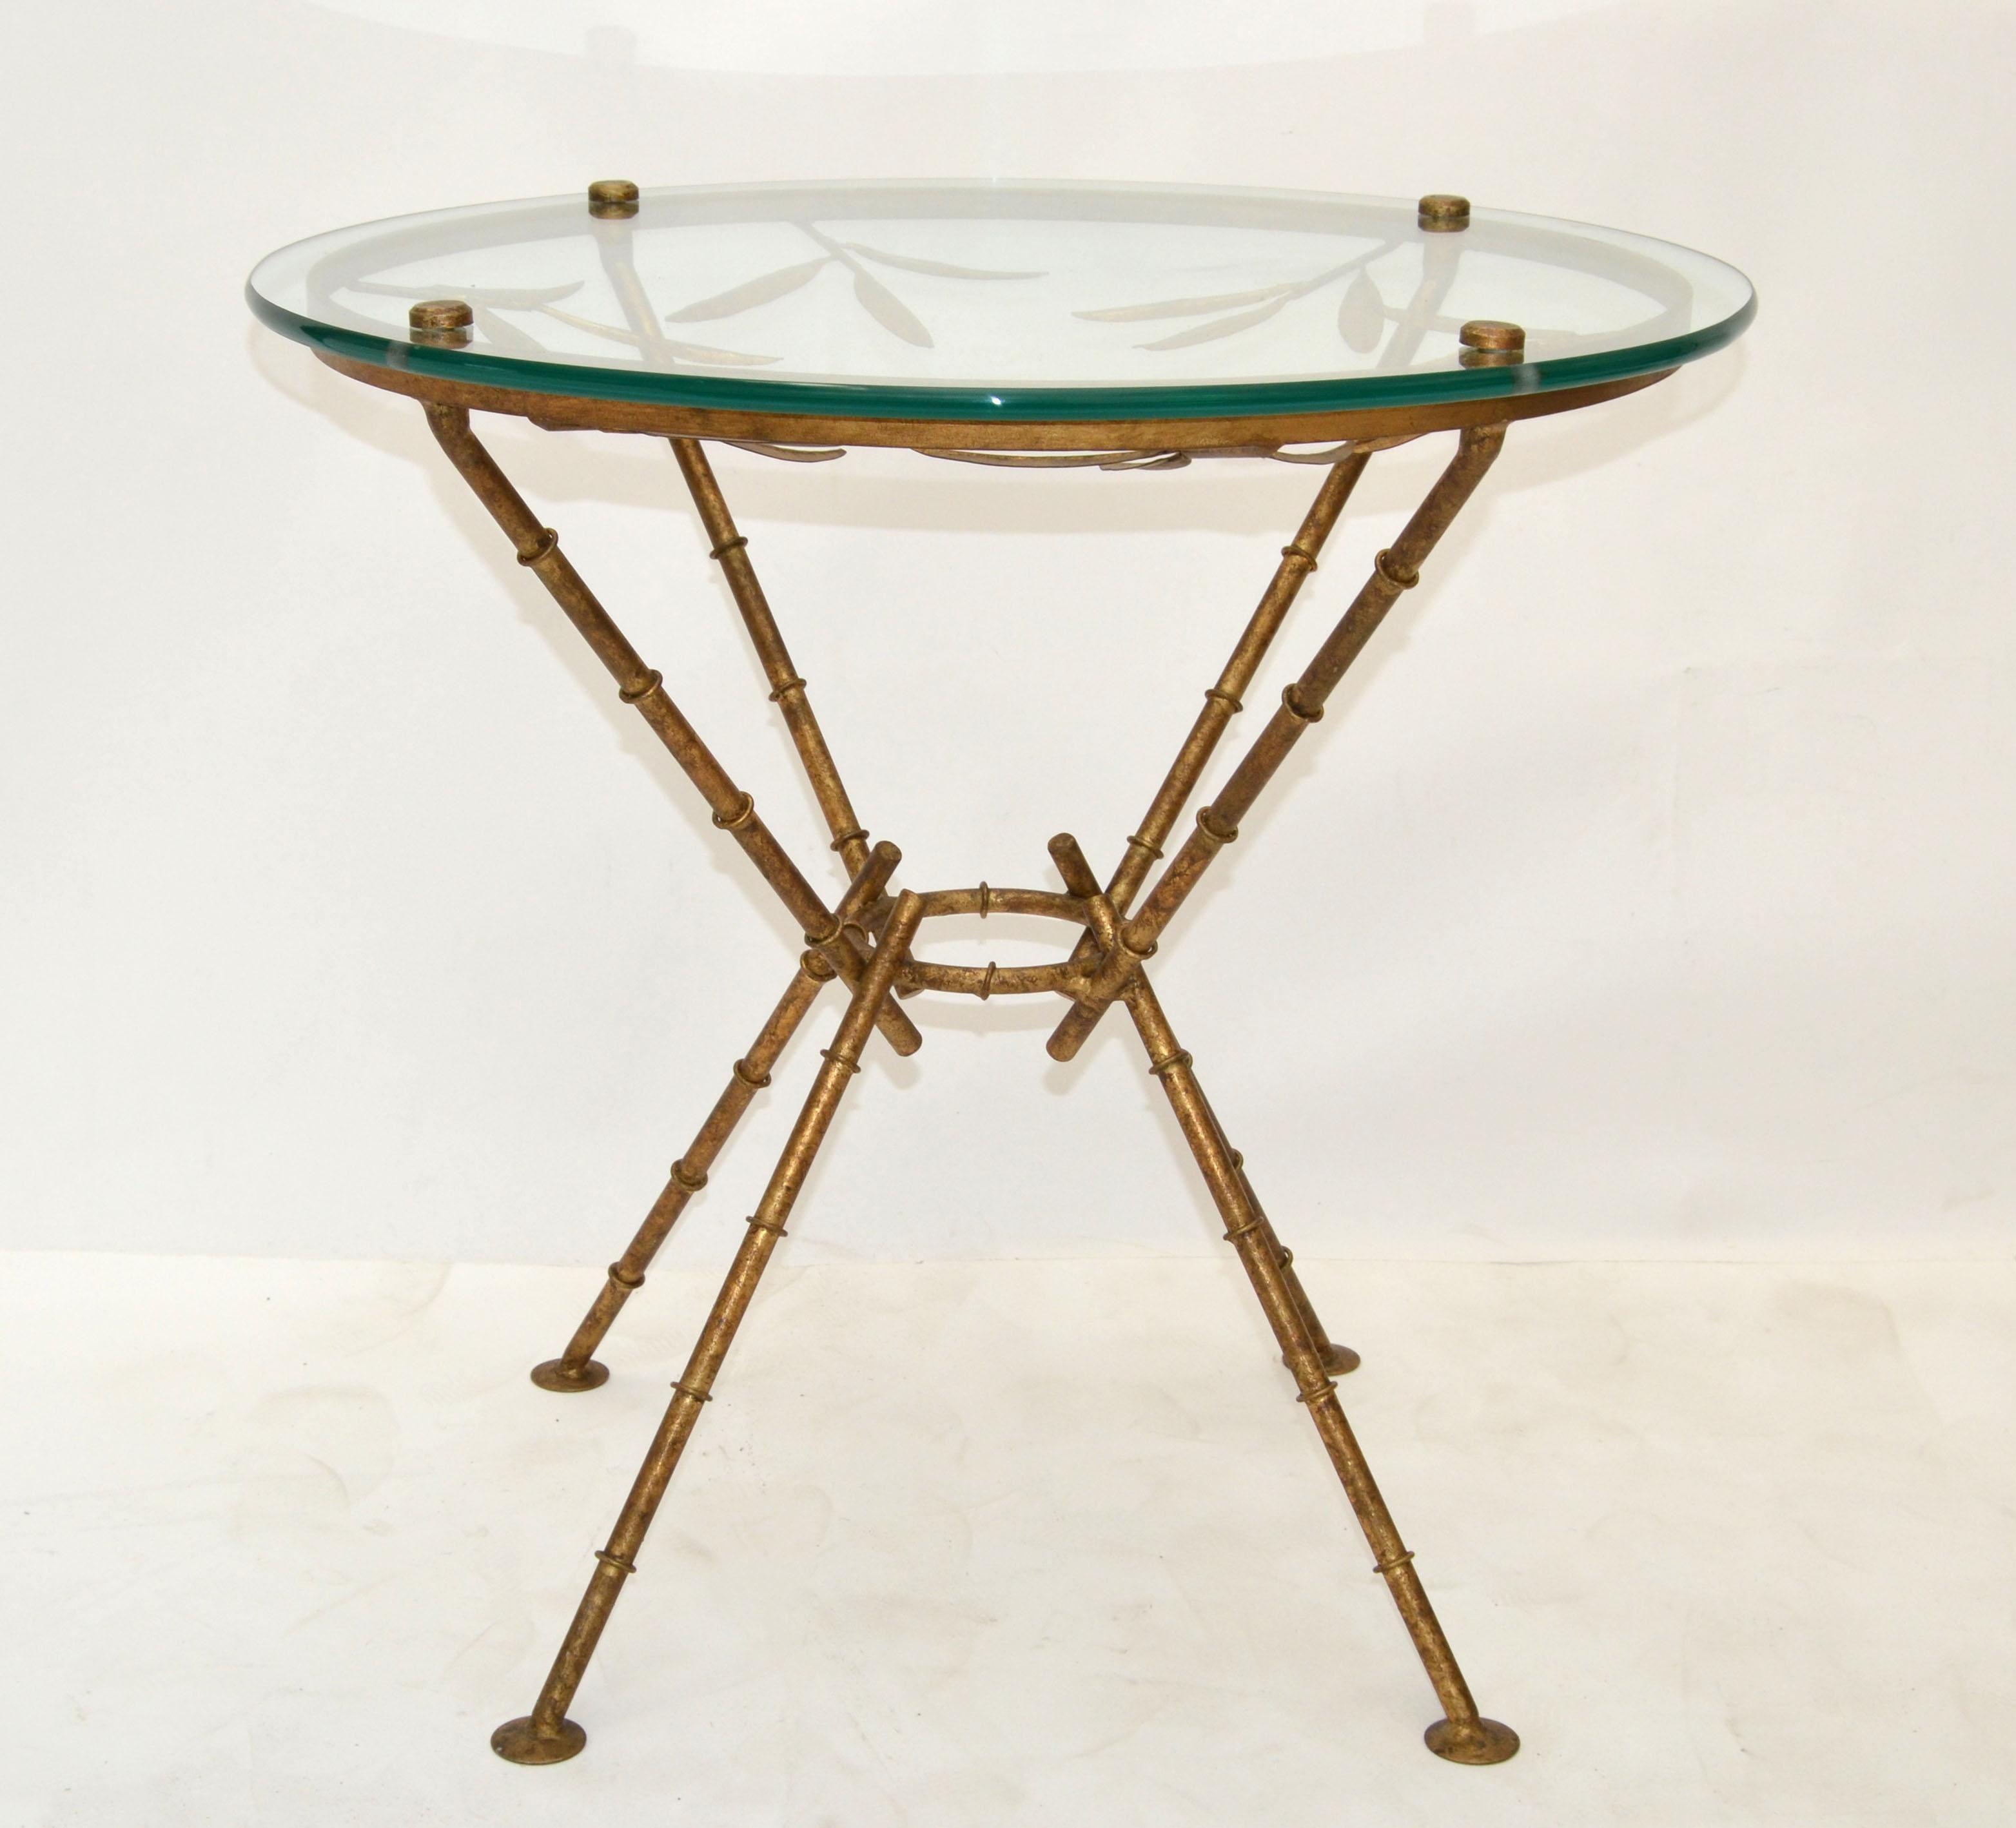 Maison Baguès Style Bronze Faux Bamboo & Leaves Glass Cocktail Table Traditional In Good Condition For Sale In Miami, FL